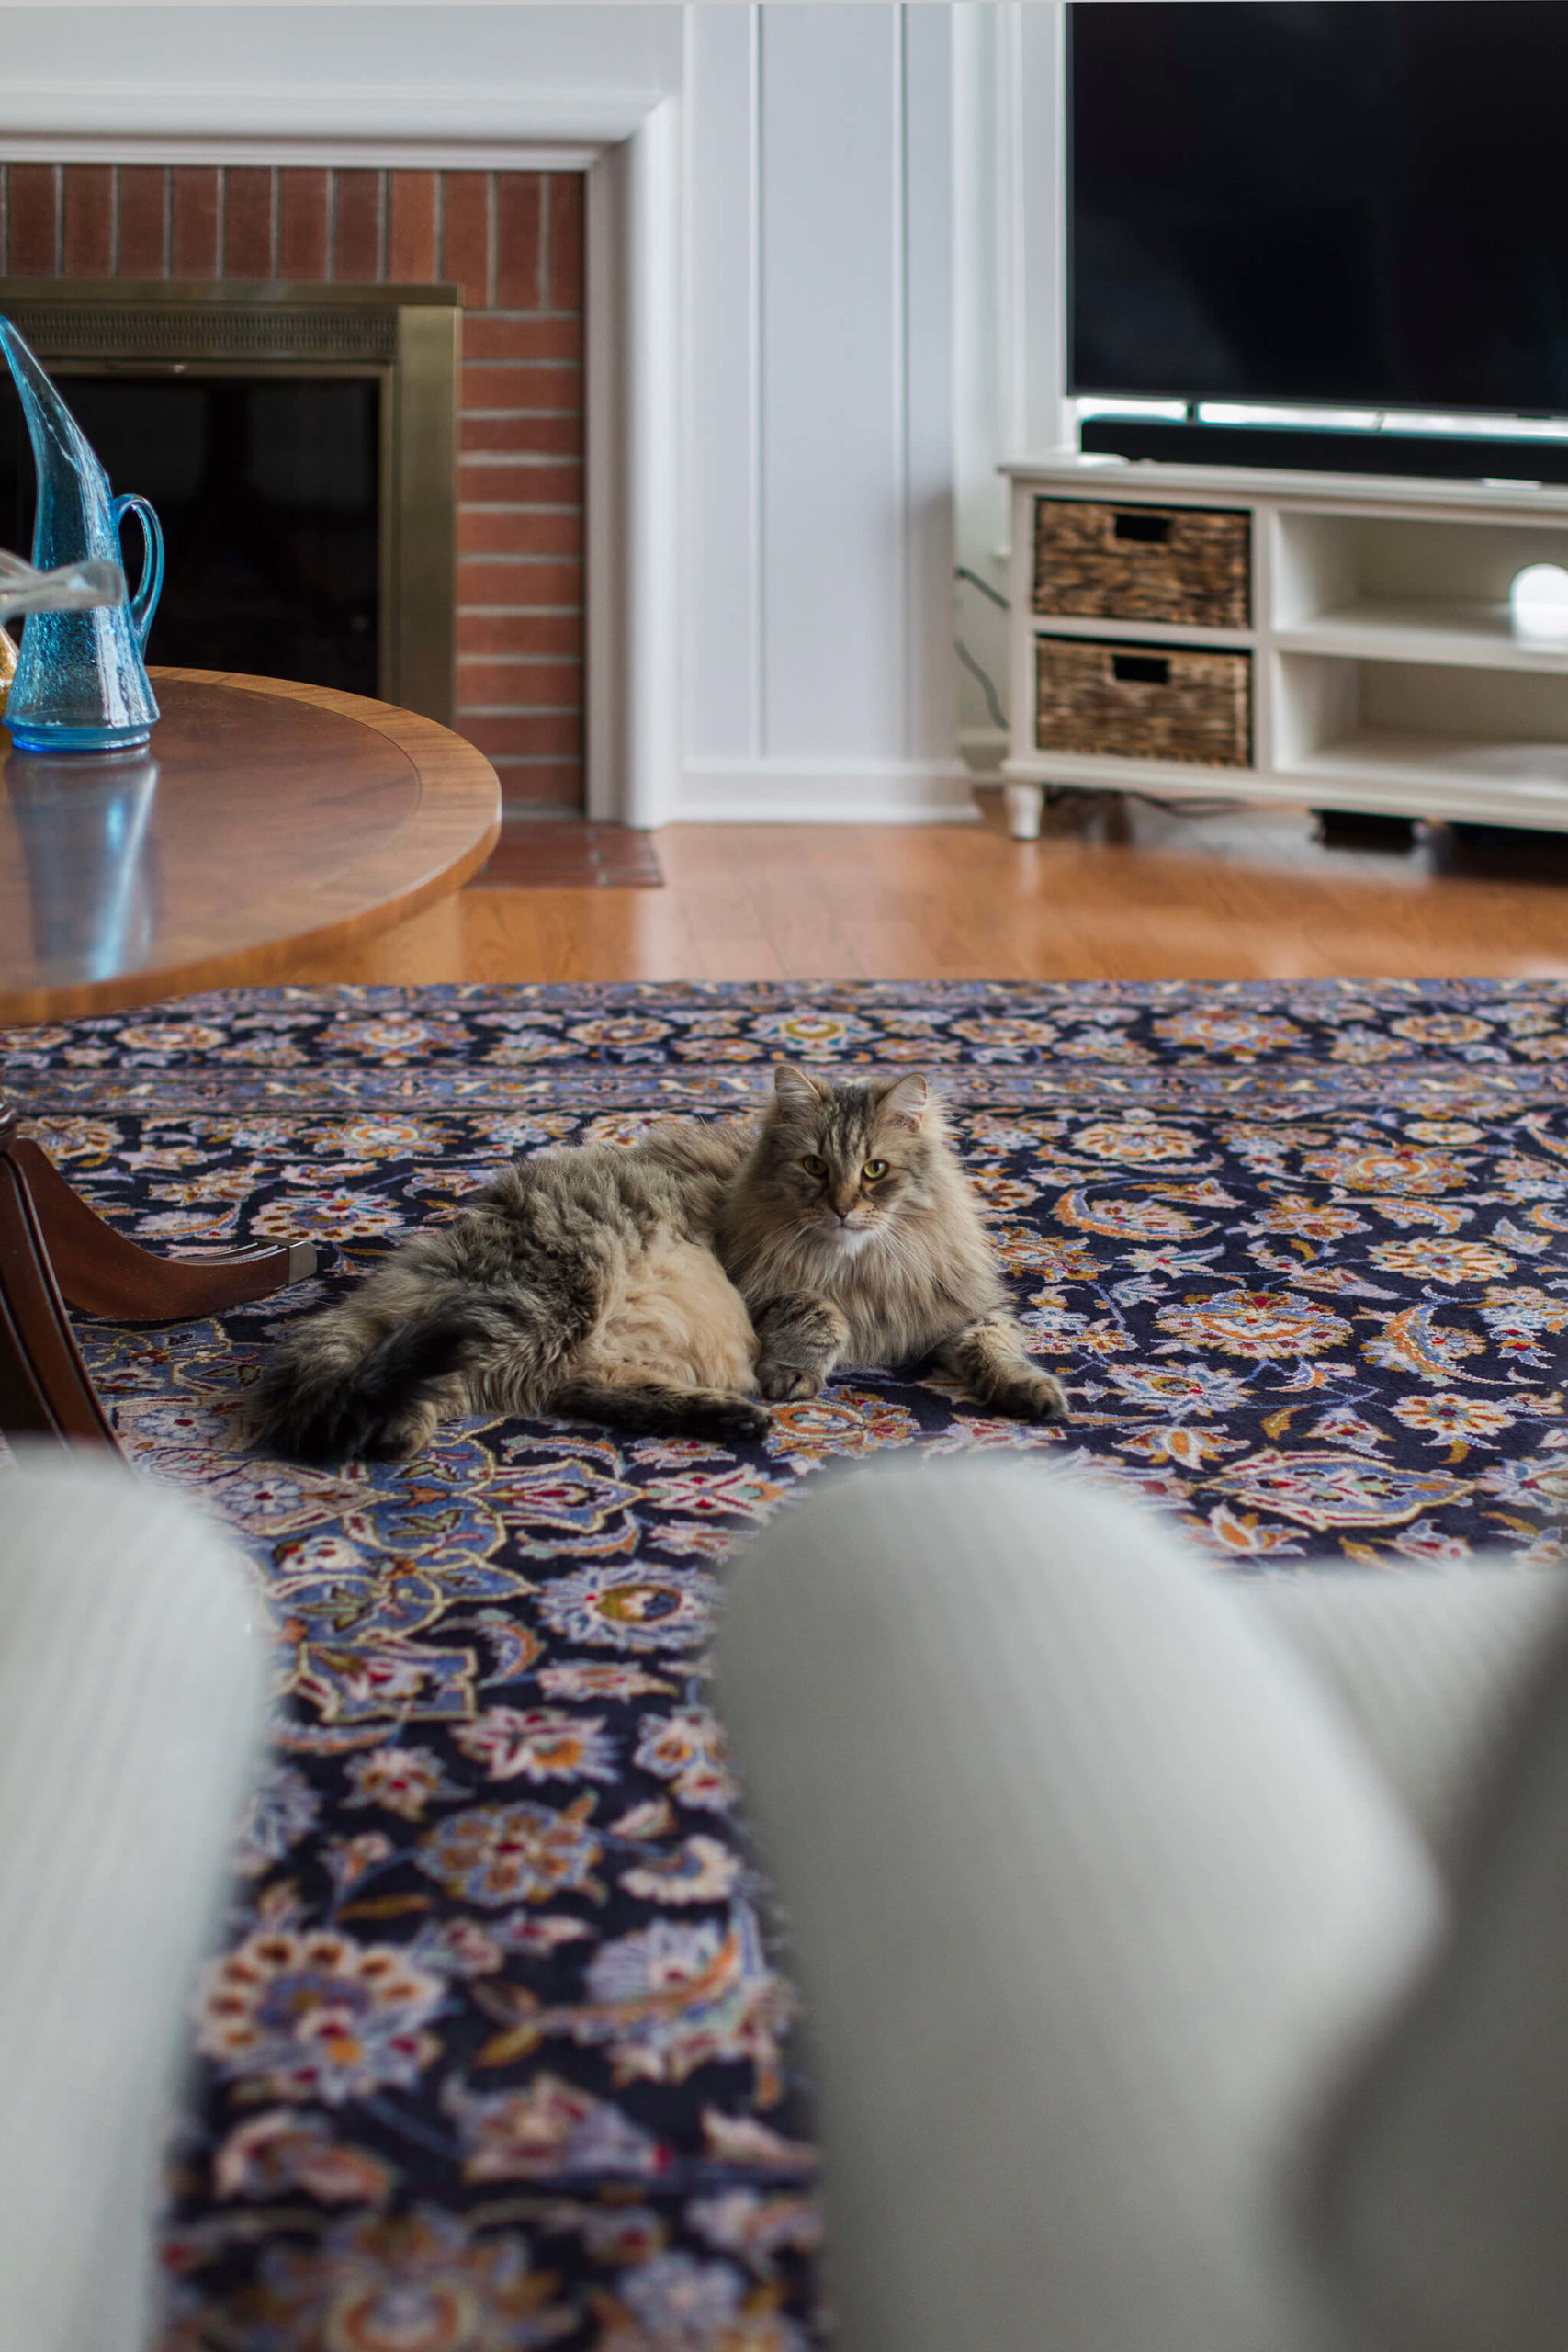 Cat lounging on Vintage Family Rug in Family Room Eclectic Interiors